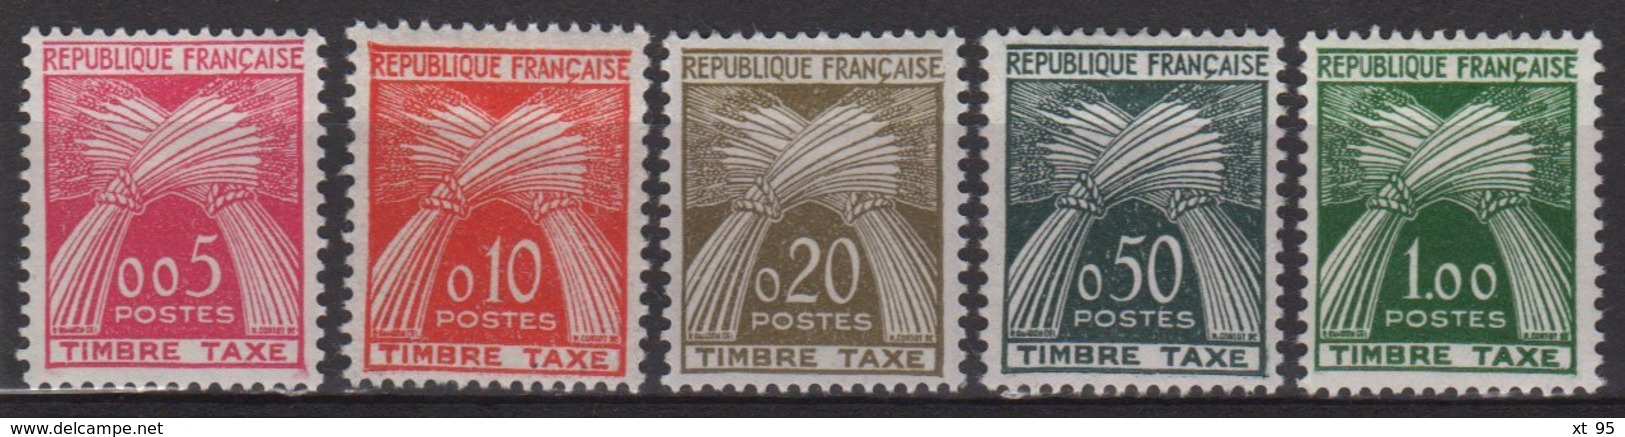 Timbres Taxe - N°90 à N°94 -  Cote 70€ - * Neufs Avec Trace De Charniere - 1859-1959 Used